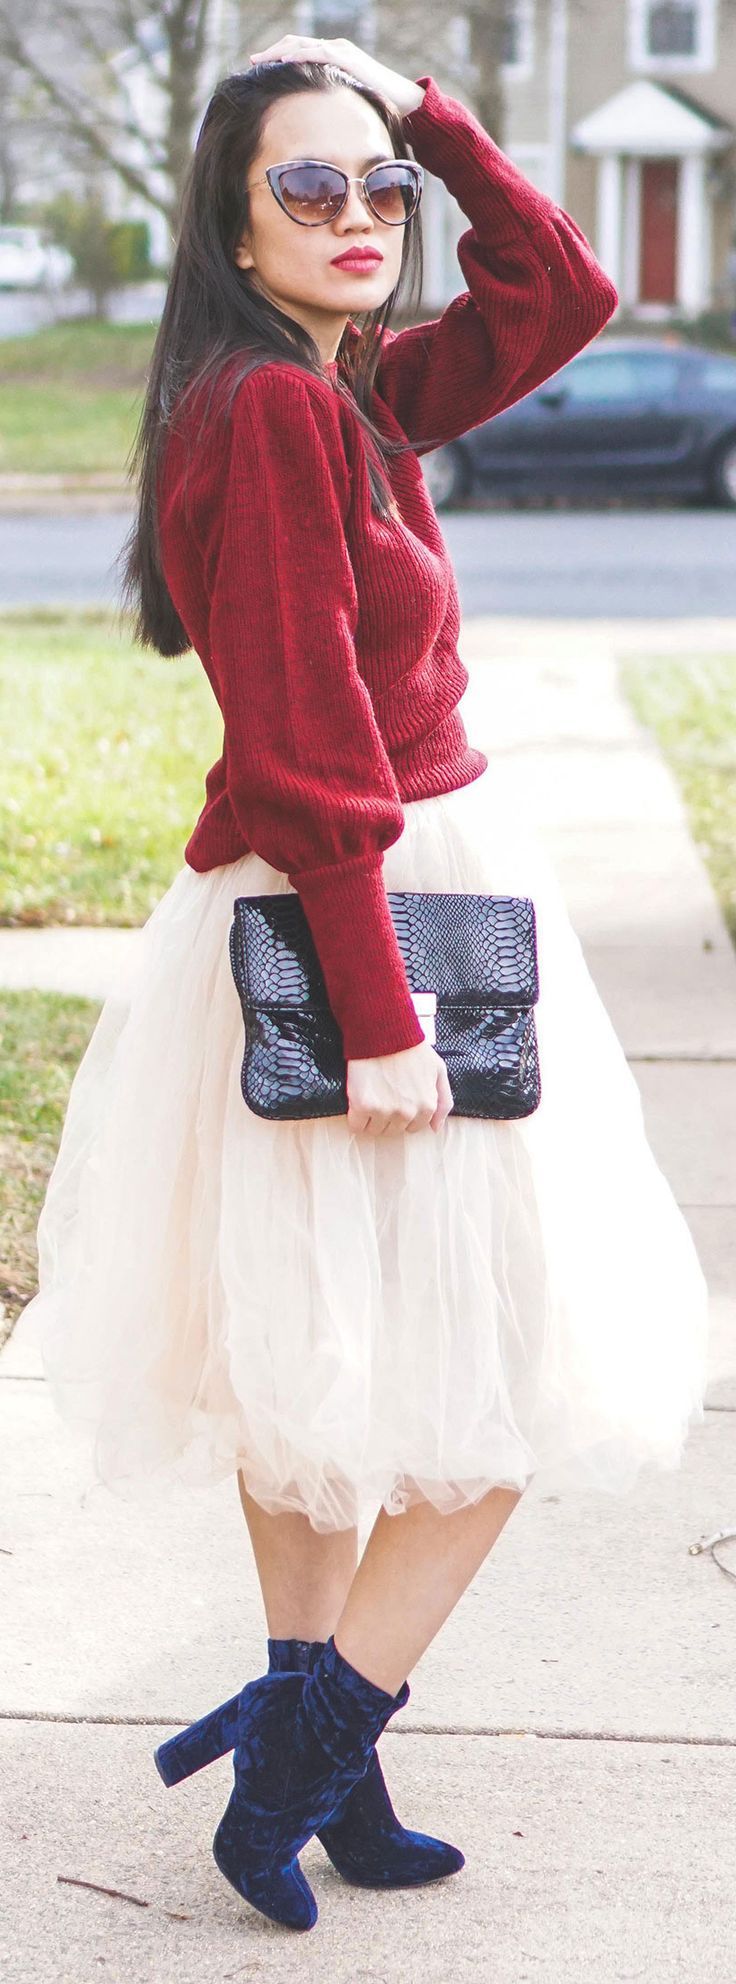 Choker Sweater + Tulle Skirt - Outfit Idea for Christmas & New Year